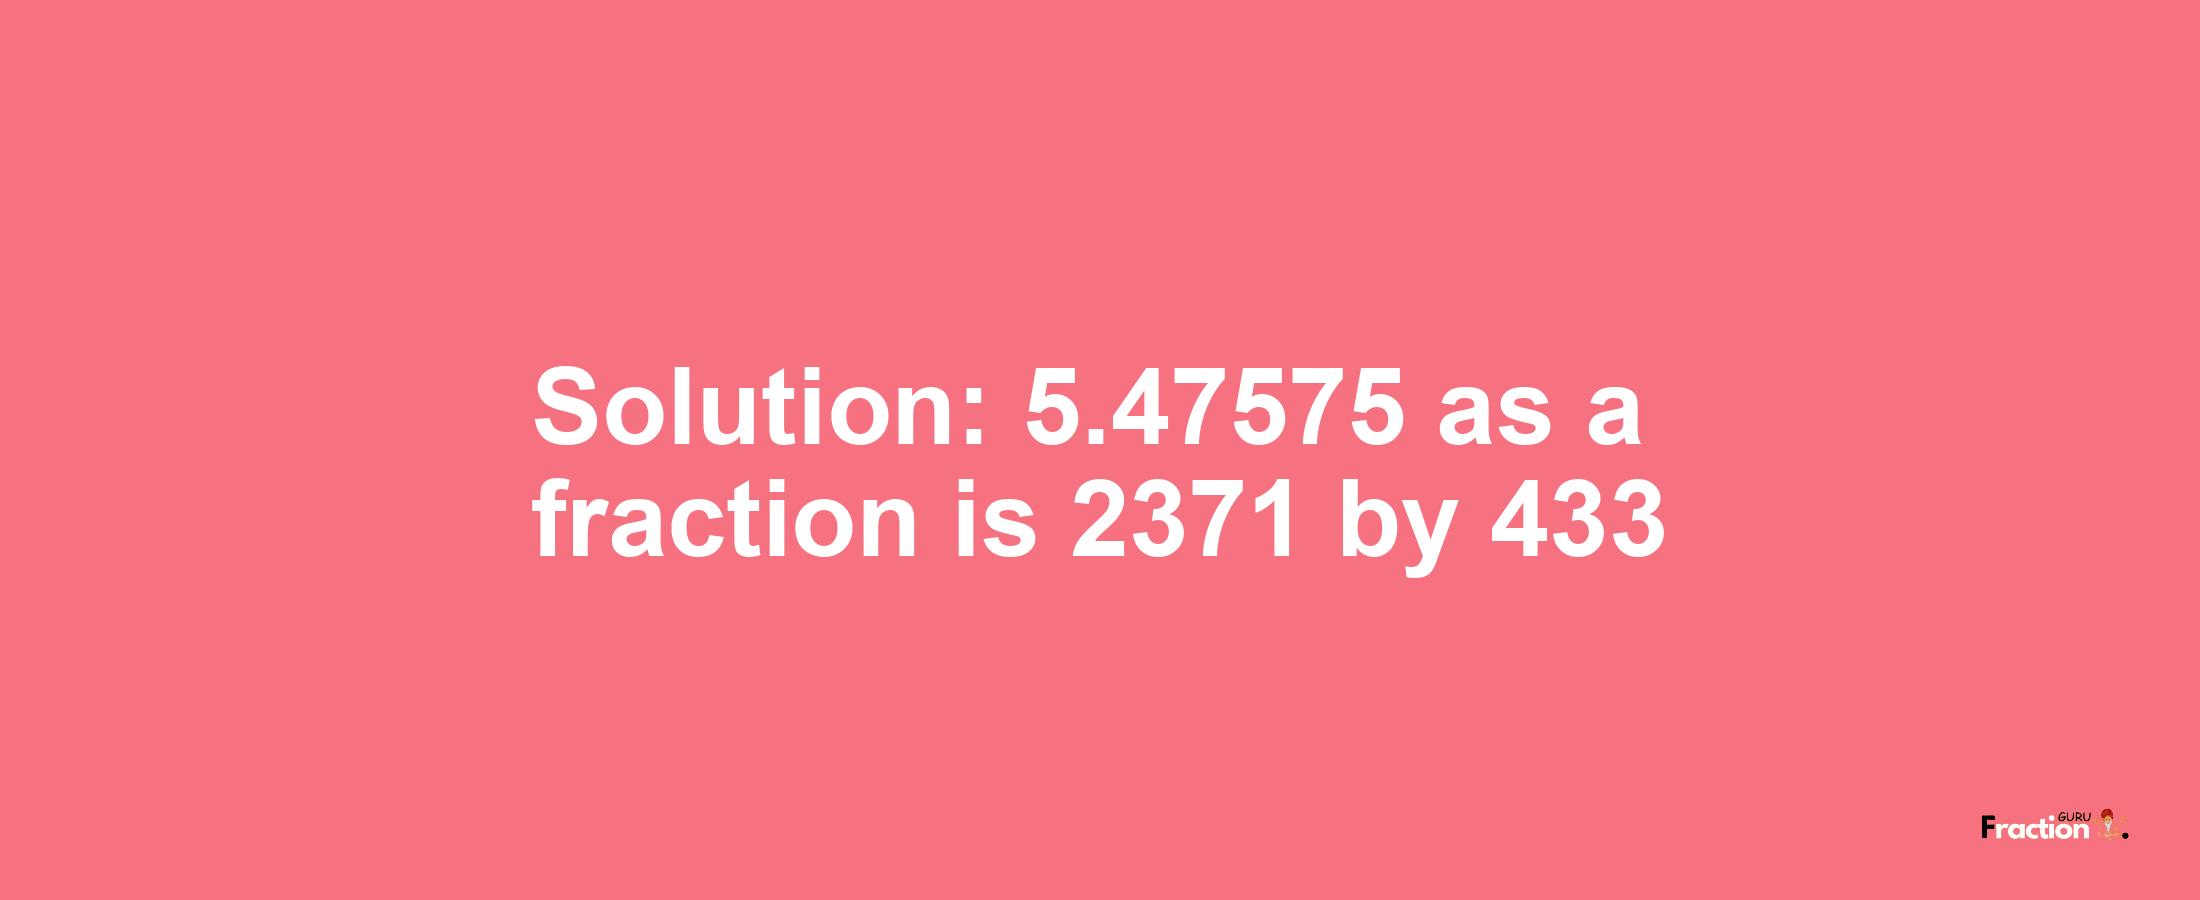 Solution:5.47575 as a fraction is 2371/433